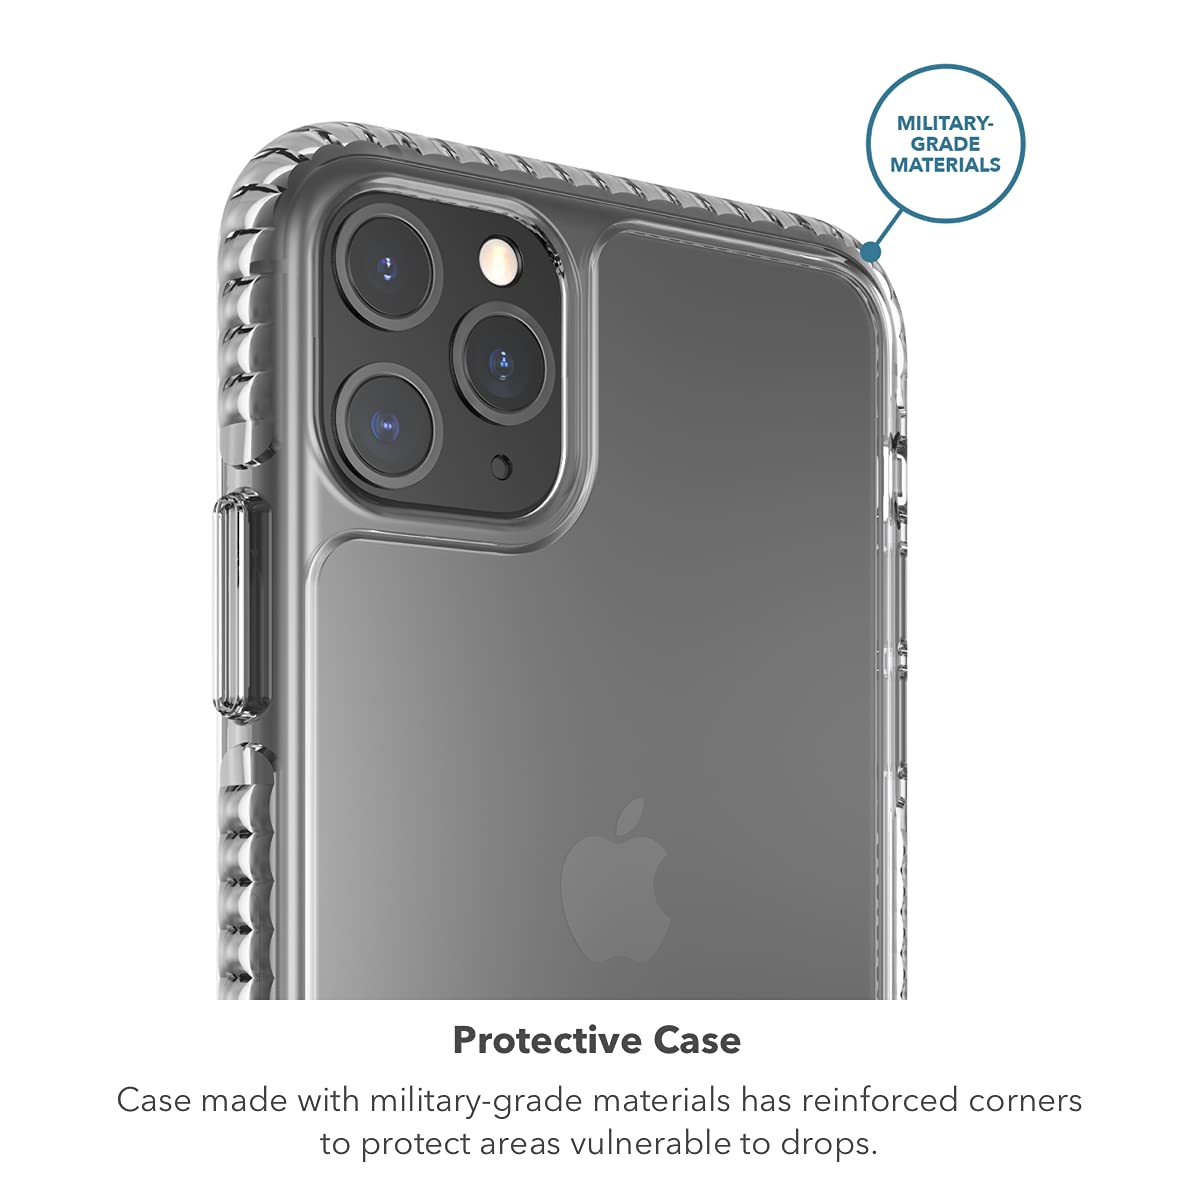 max Protection - Bundle - Impact Protection Case and Tempered Glass Screen Protector - Made for Apple iPhone 11 Pro Max - Clear